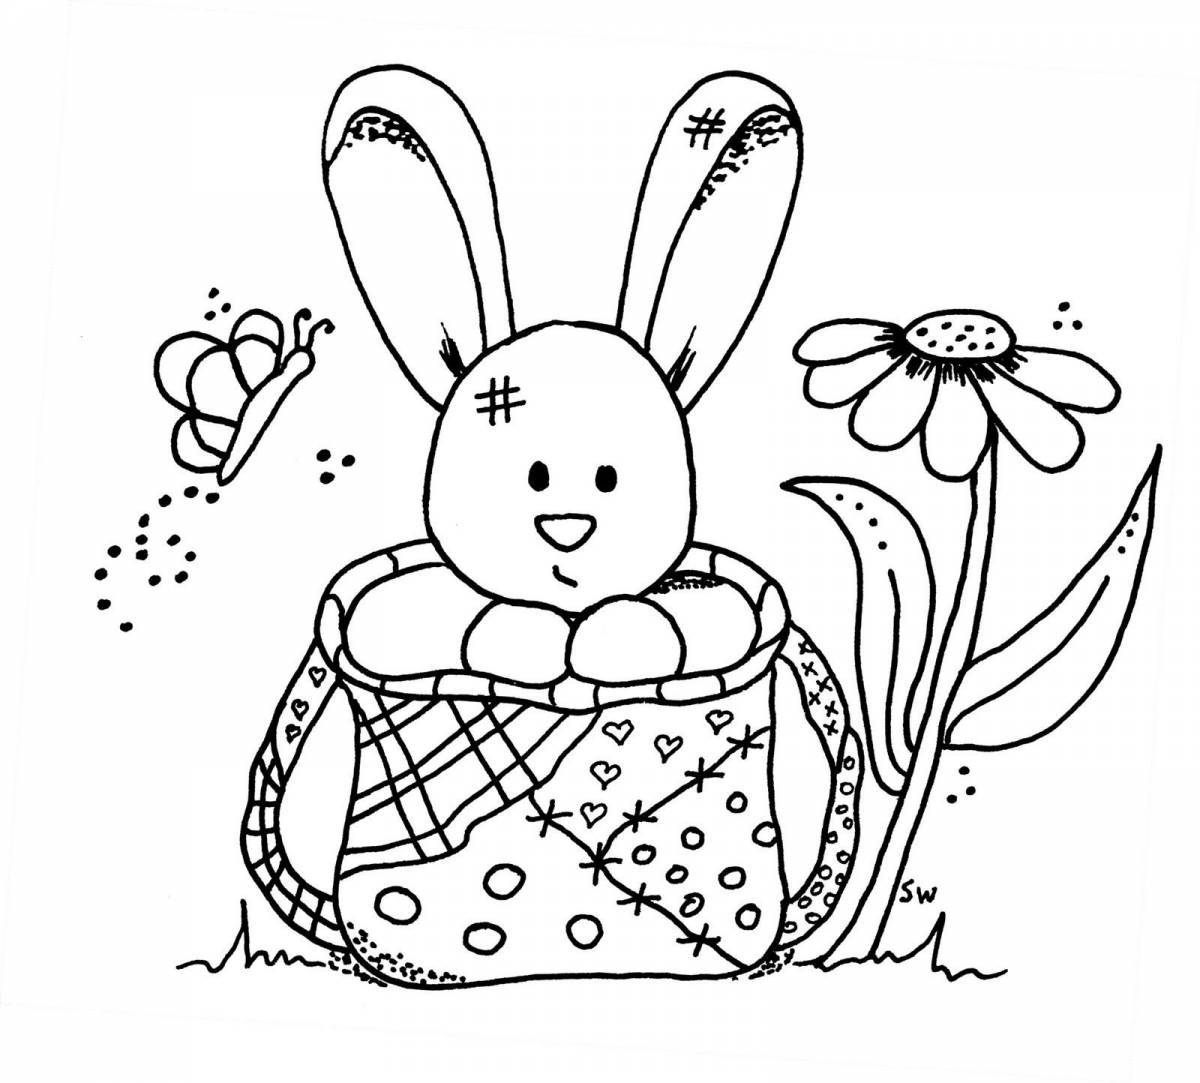 Gorgeous Christmas rabbit coloring book